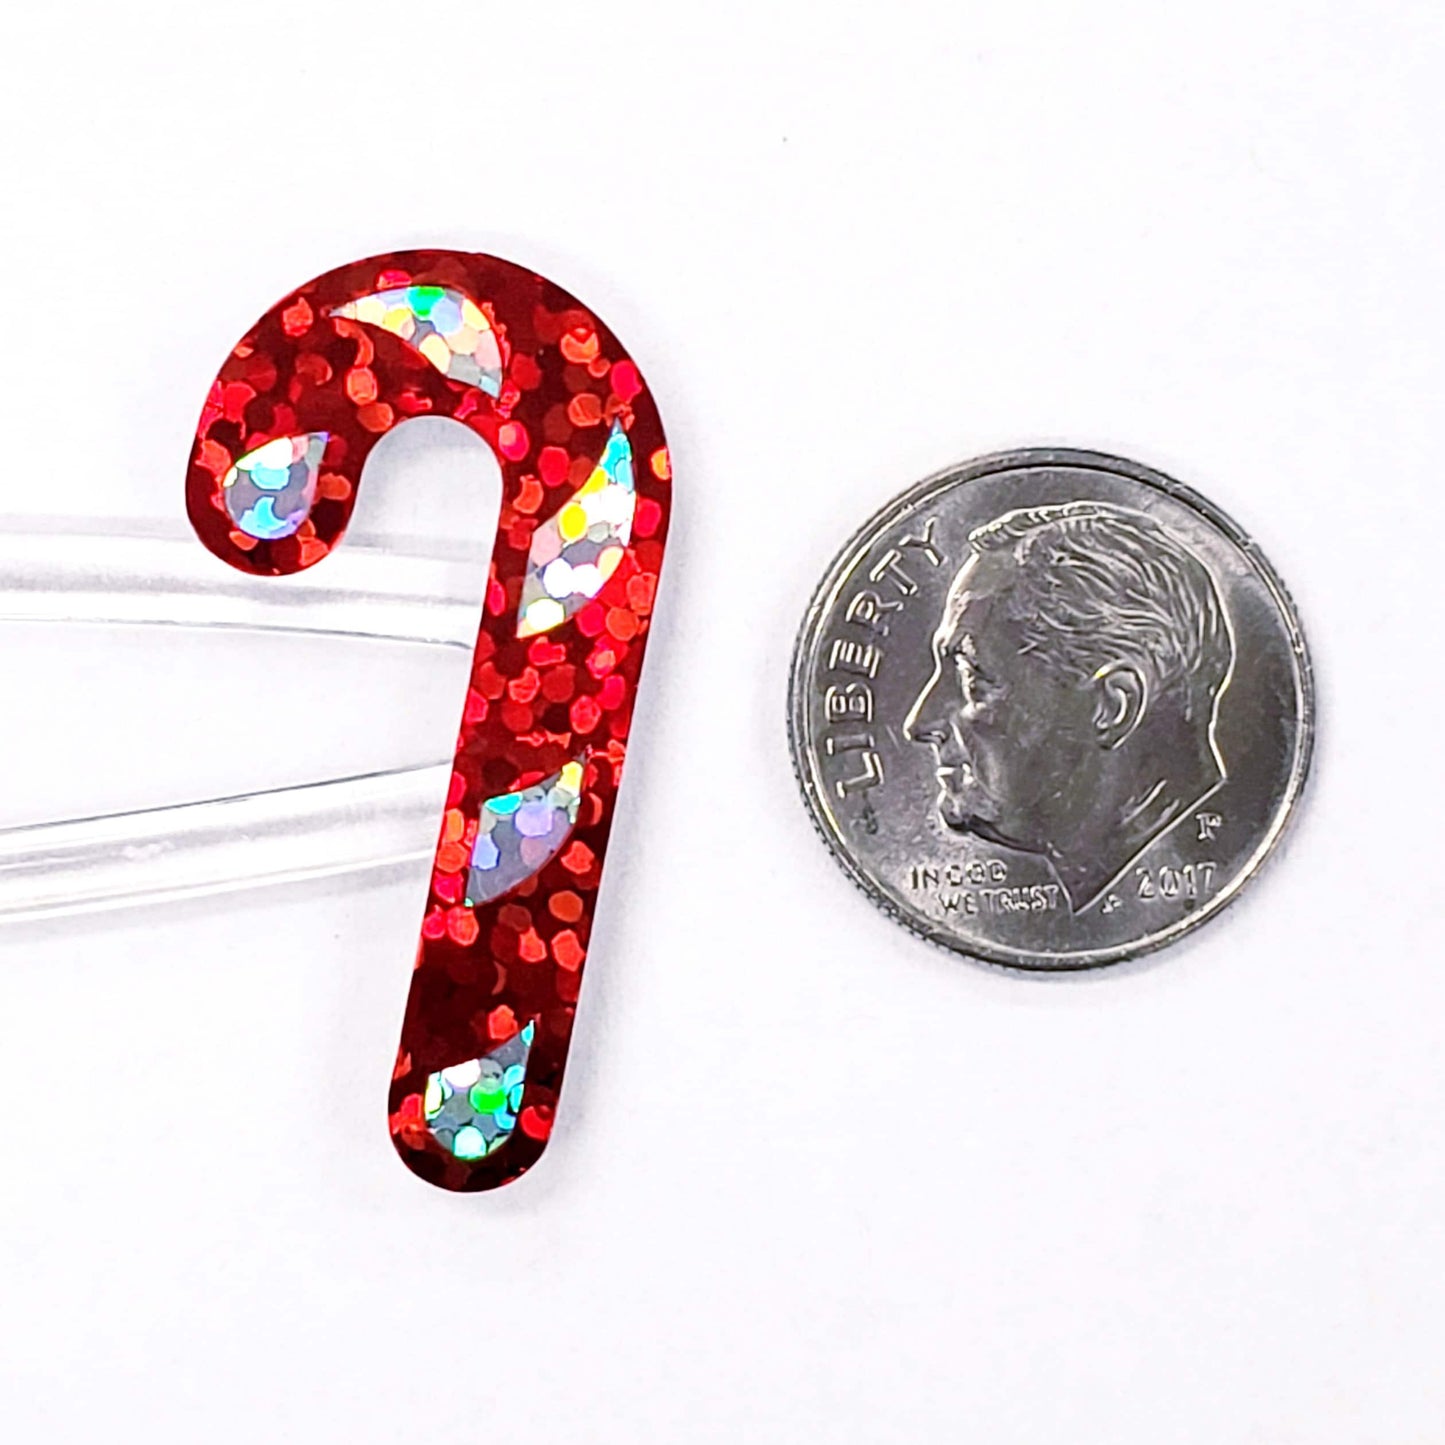 Candy Cane Stickers, set of 30 sparkly Christmas peppermint stickers for holiday cards, ornaments, advent calendars and gift tags and wrap.